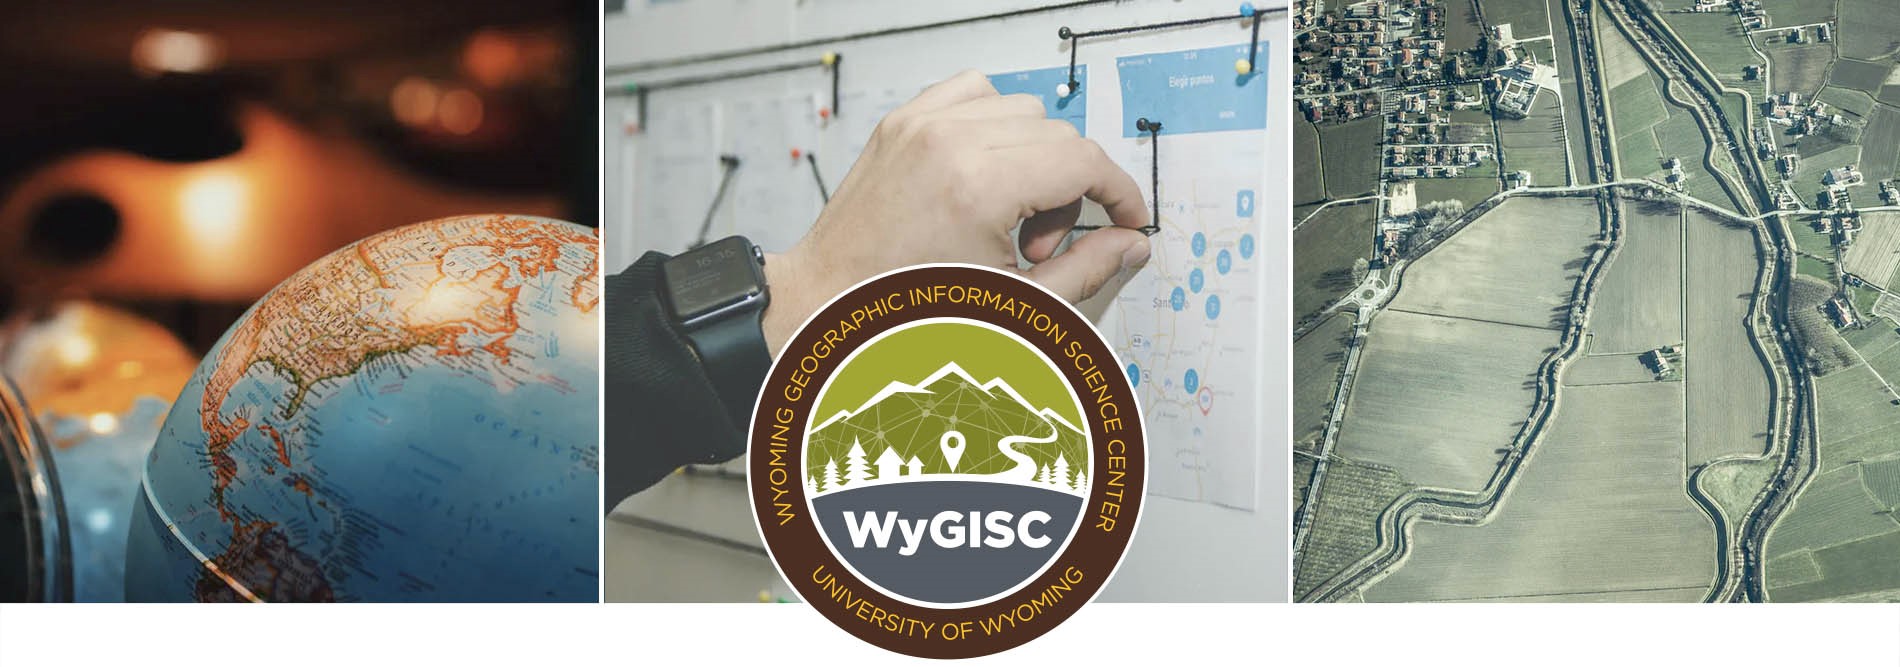 WyGISC logo over globe, maps, and aerial view